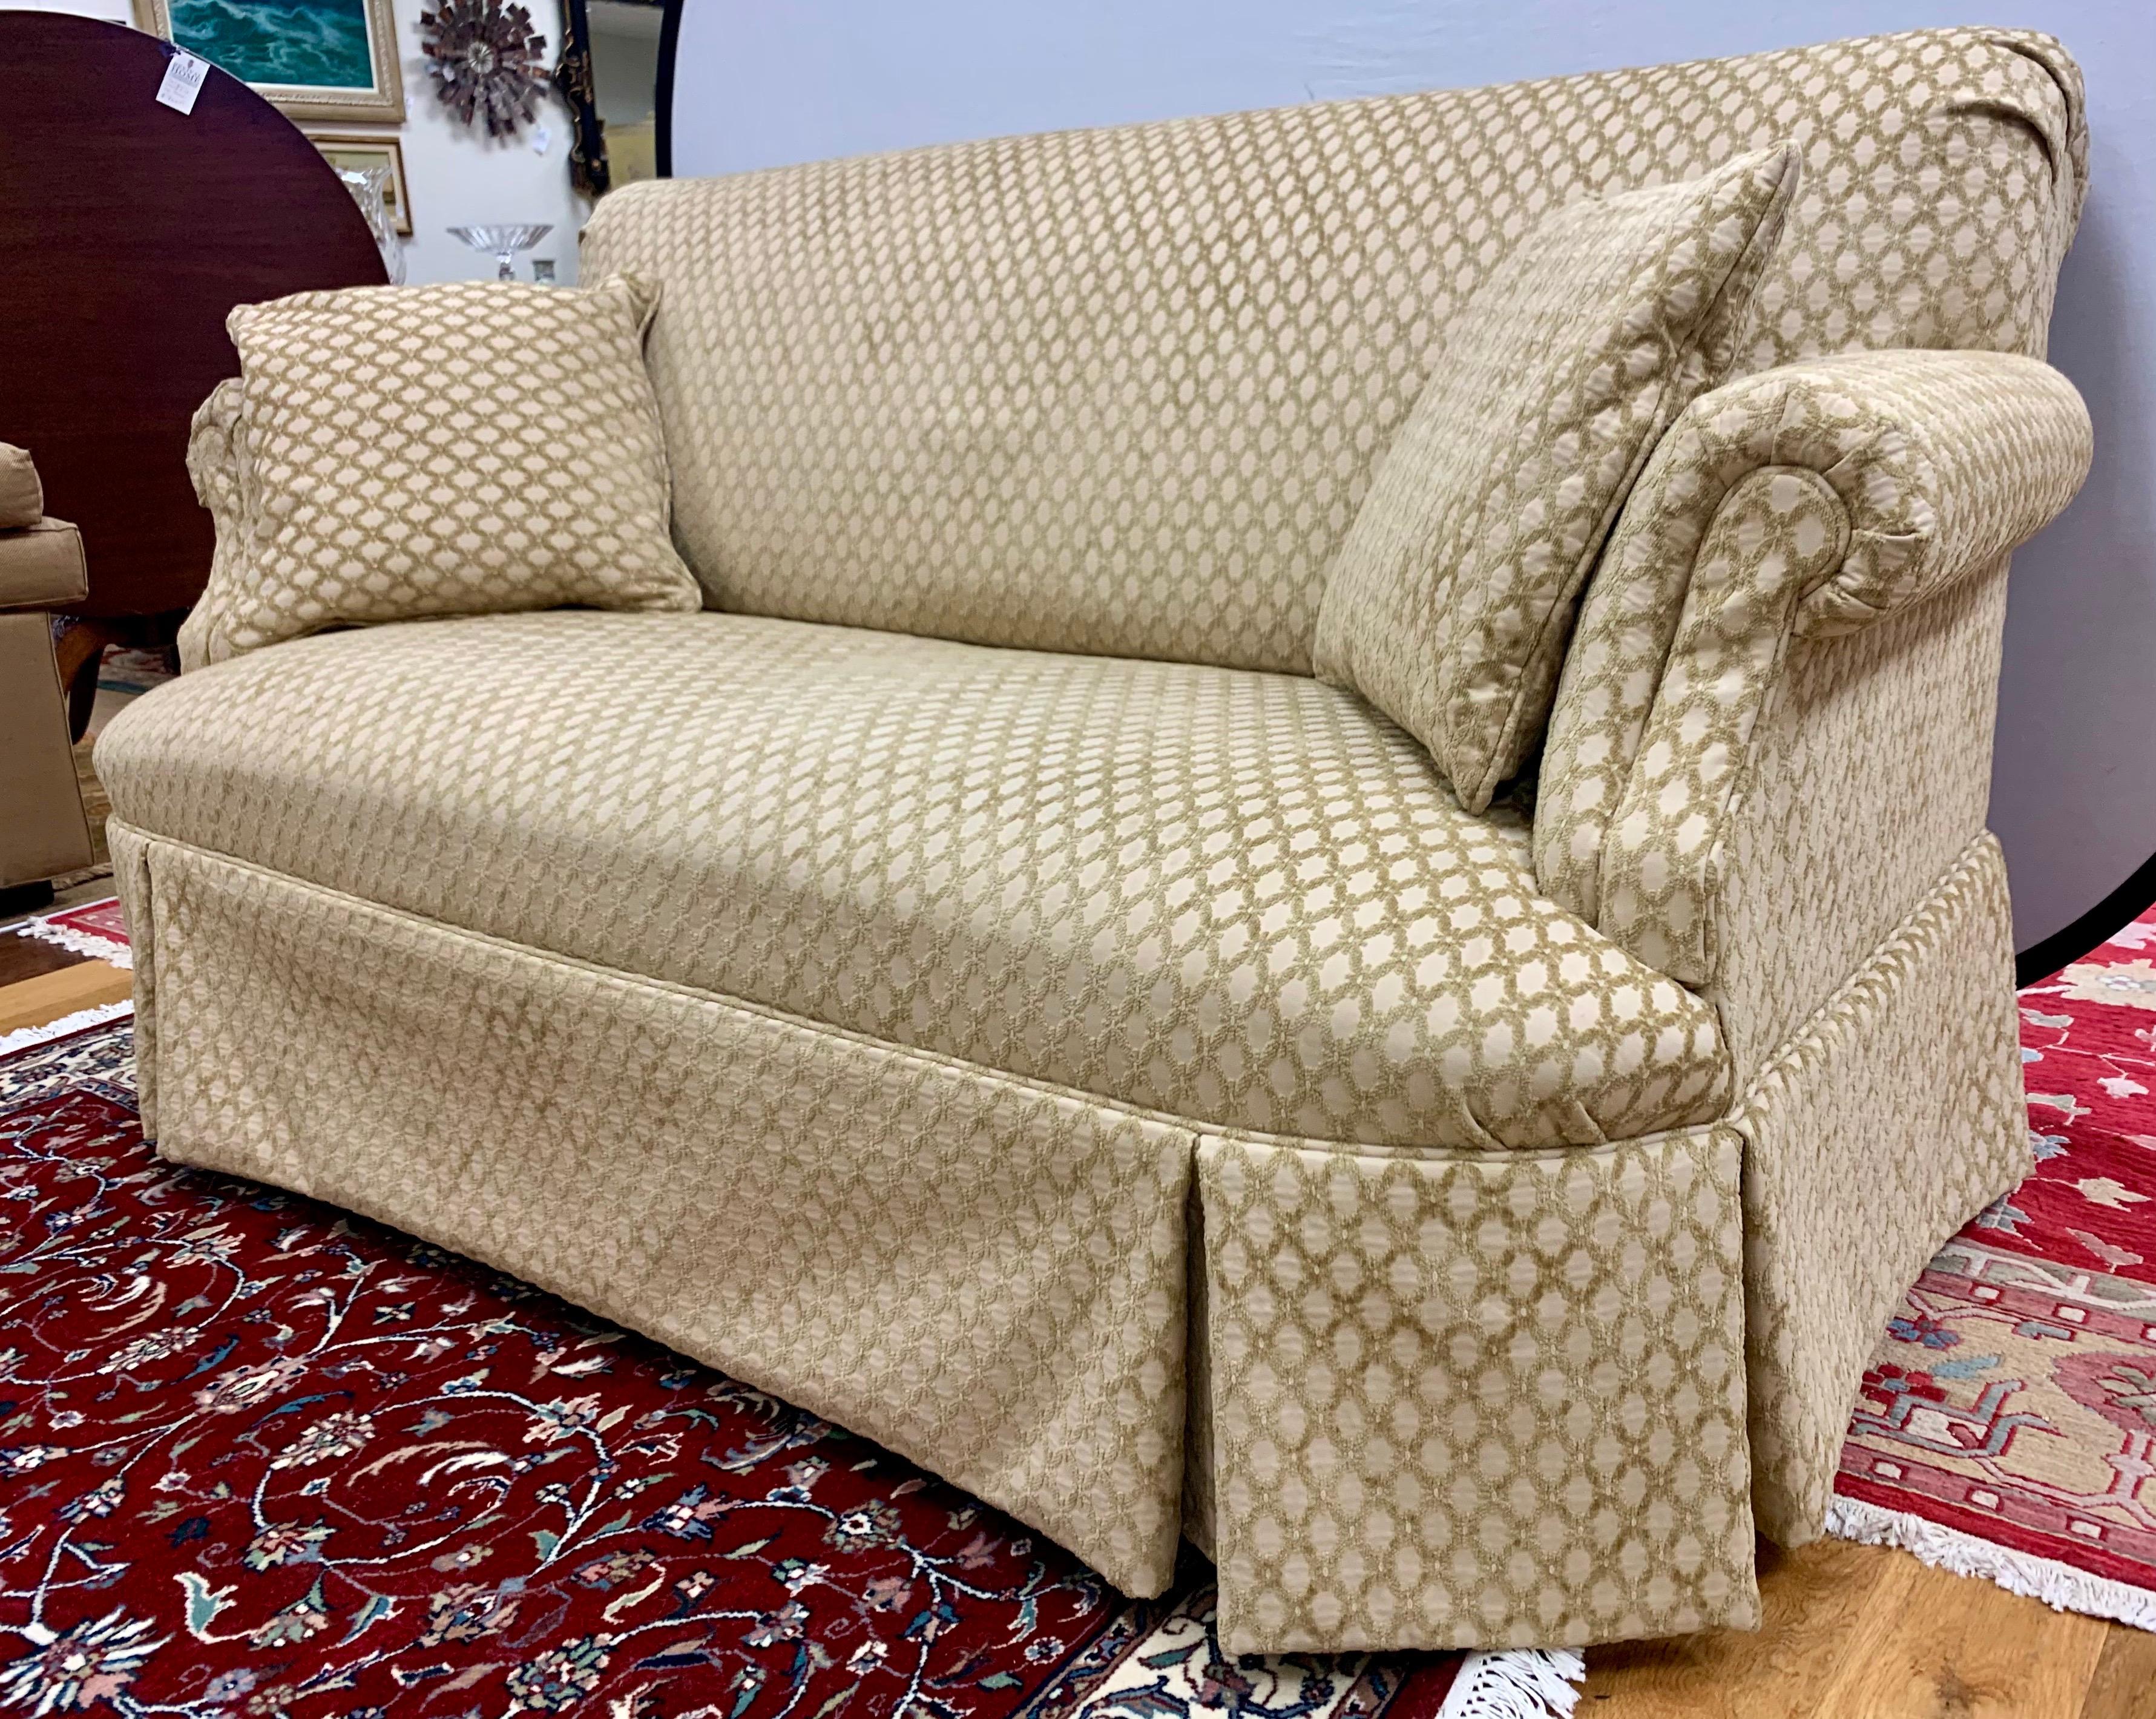 Stunning custom loveseat that measures six feet wide and has a luxurious Kravet fabric
featuring a regal raised trellis pattern. The second of two matching loveseats. All dimensions are below. Now, more than ever, home is where the heart is.